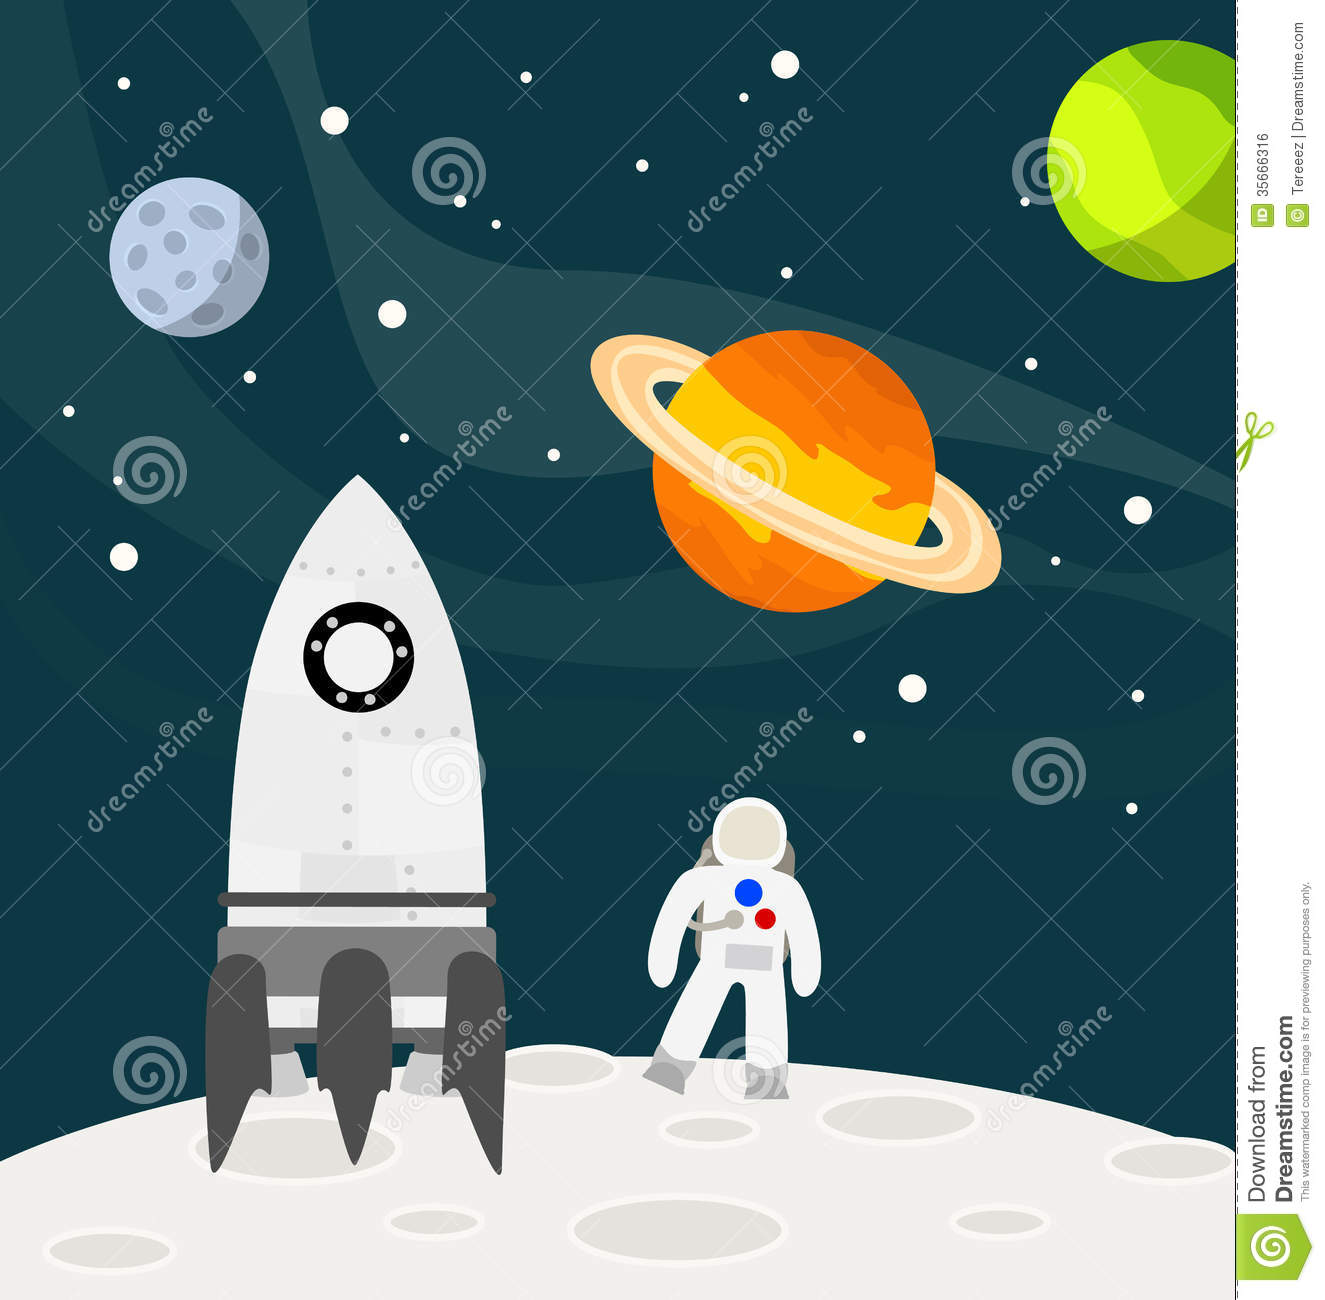 Astronaut On The Moon With Rocket Vector Royalty Free Stock Image